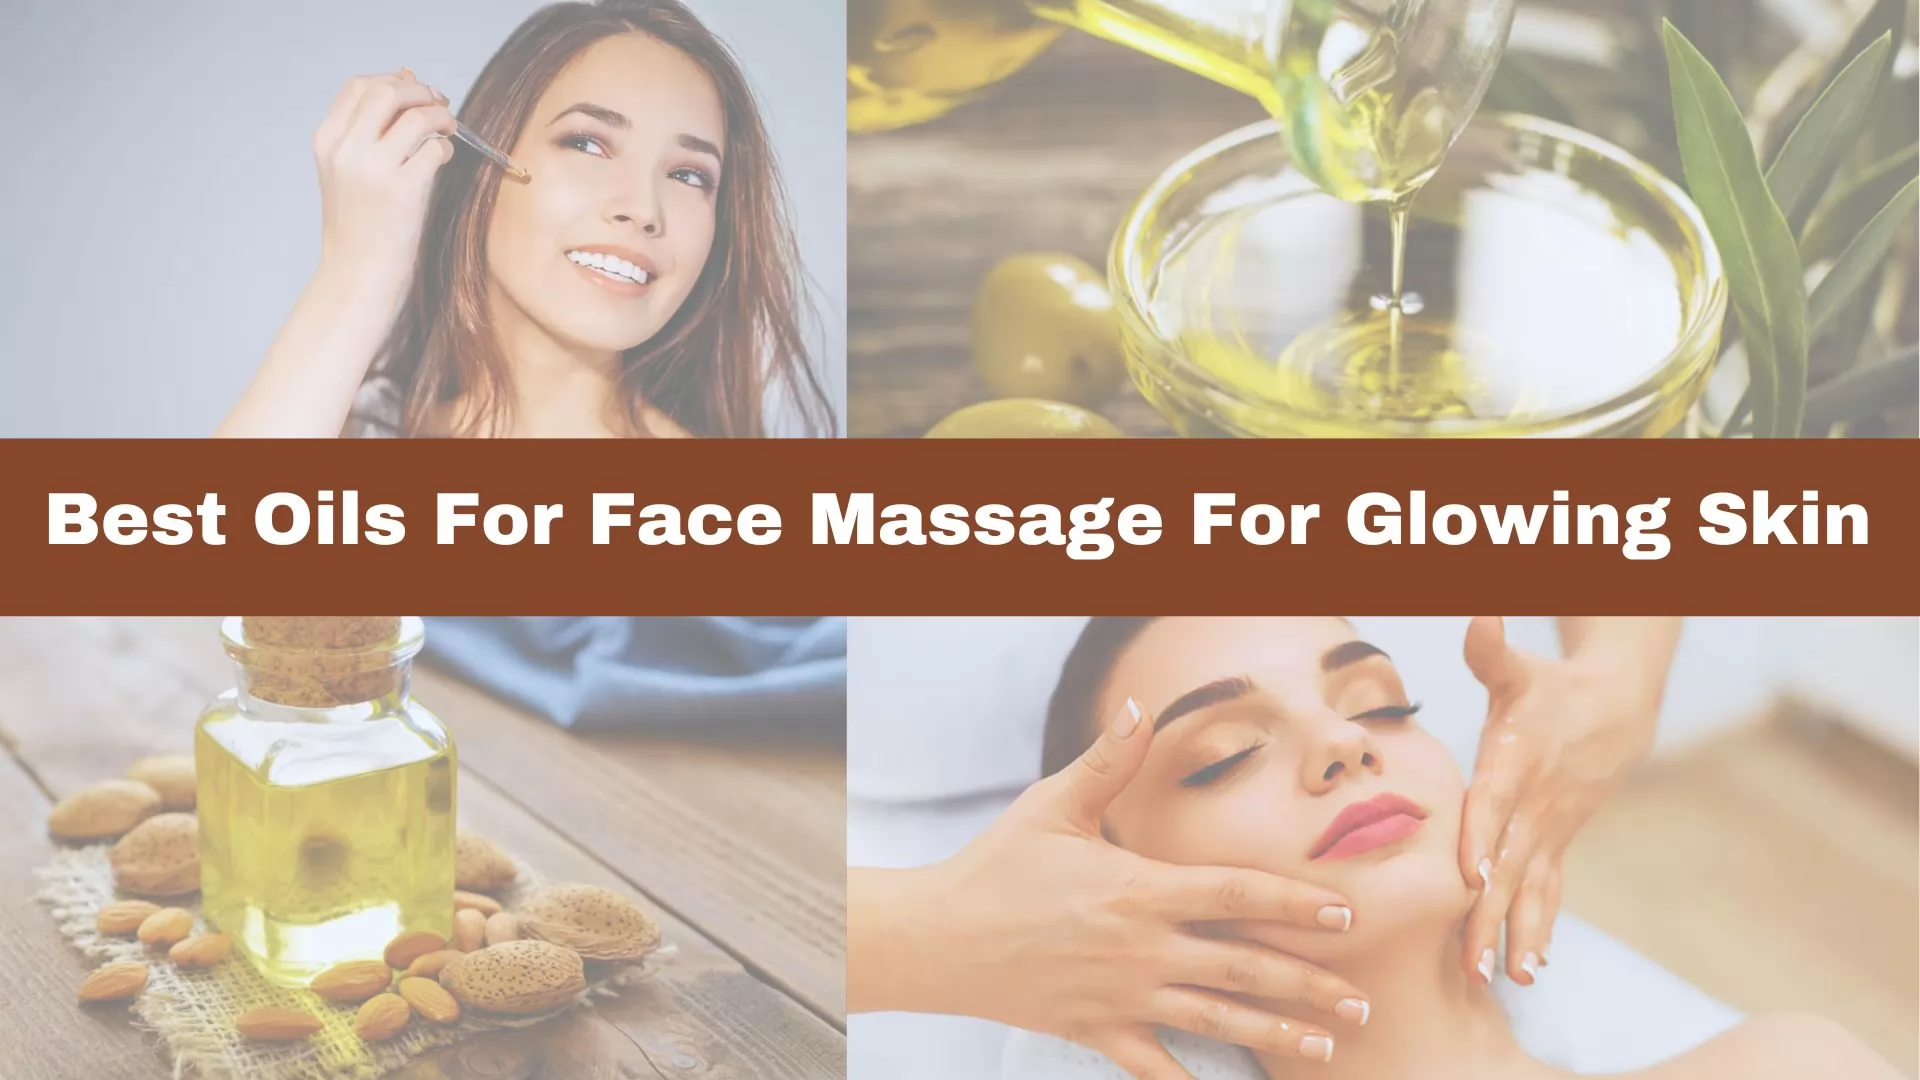 Best Oils For Face Massage For Glowing Skin